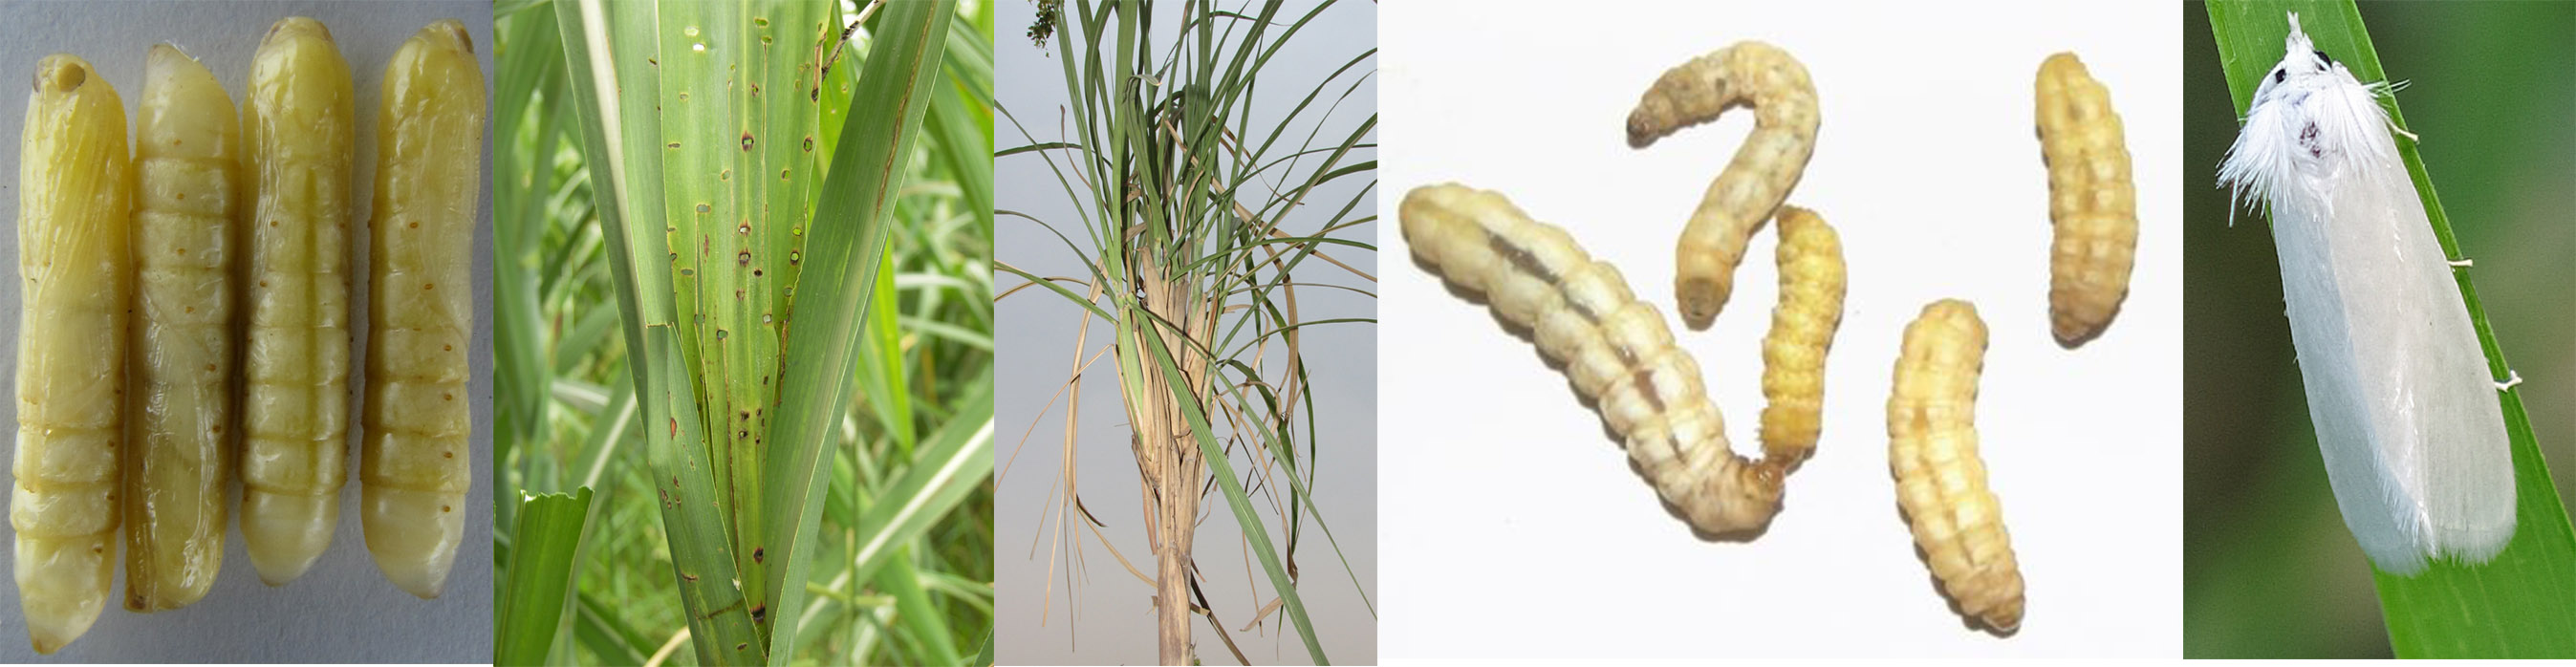 Sugarcane Top Borer different stages and damage